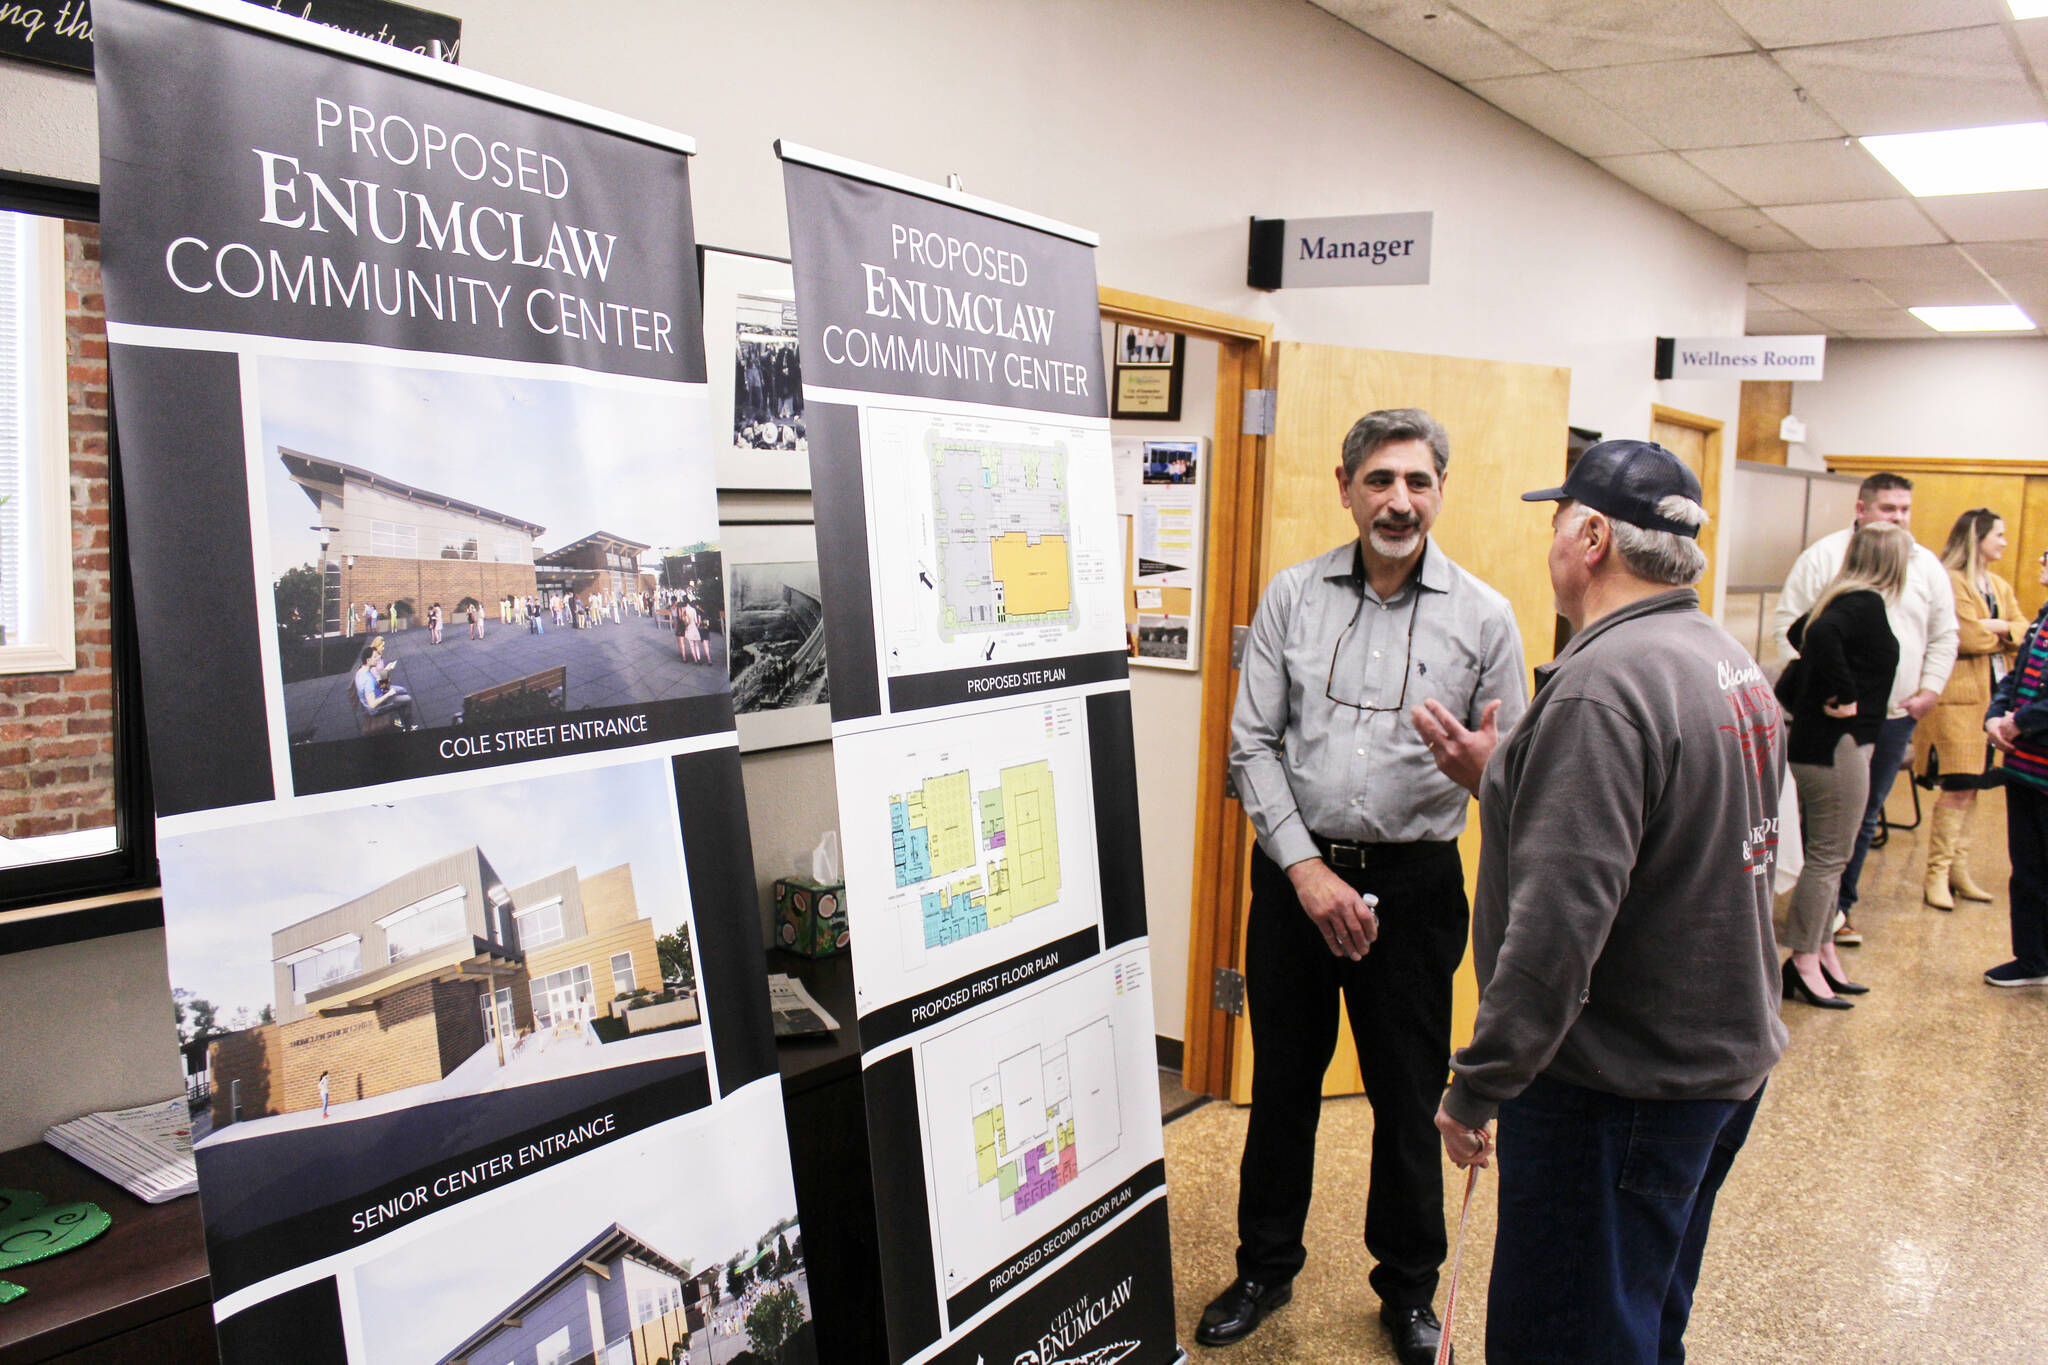 Enumclaw Mayor Jan Molinaro answering questions about the proposed community center right before the March 14 open house got underway. Photo by Ray Miller-Still